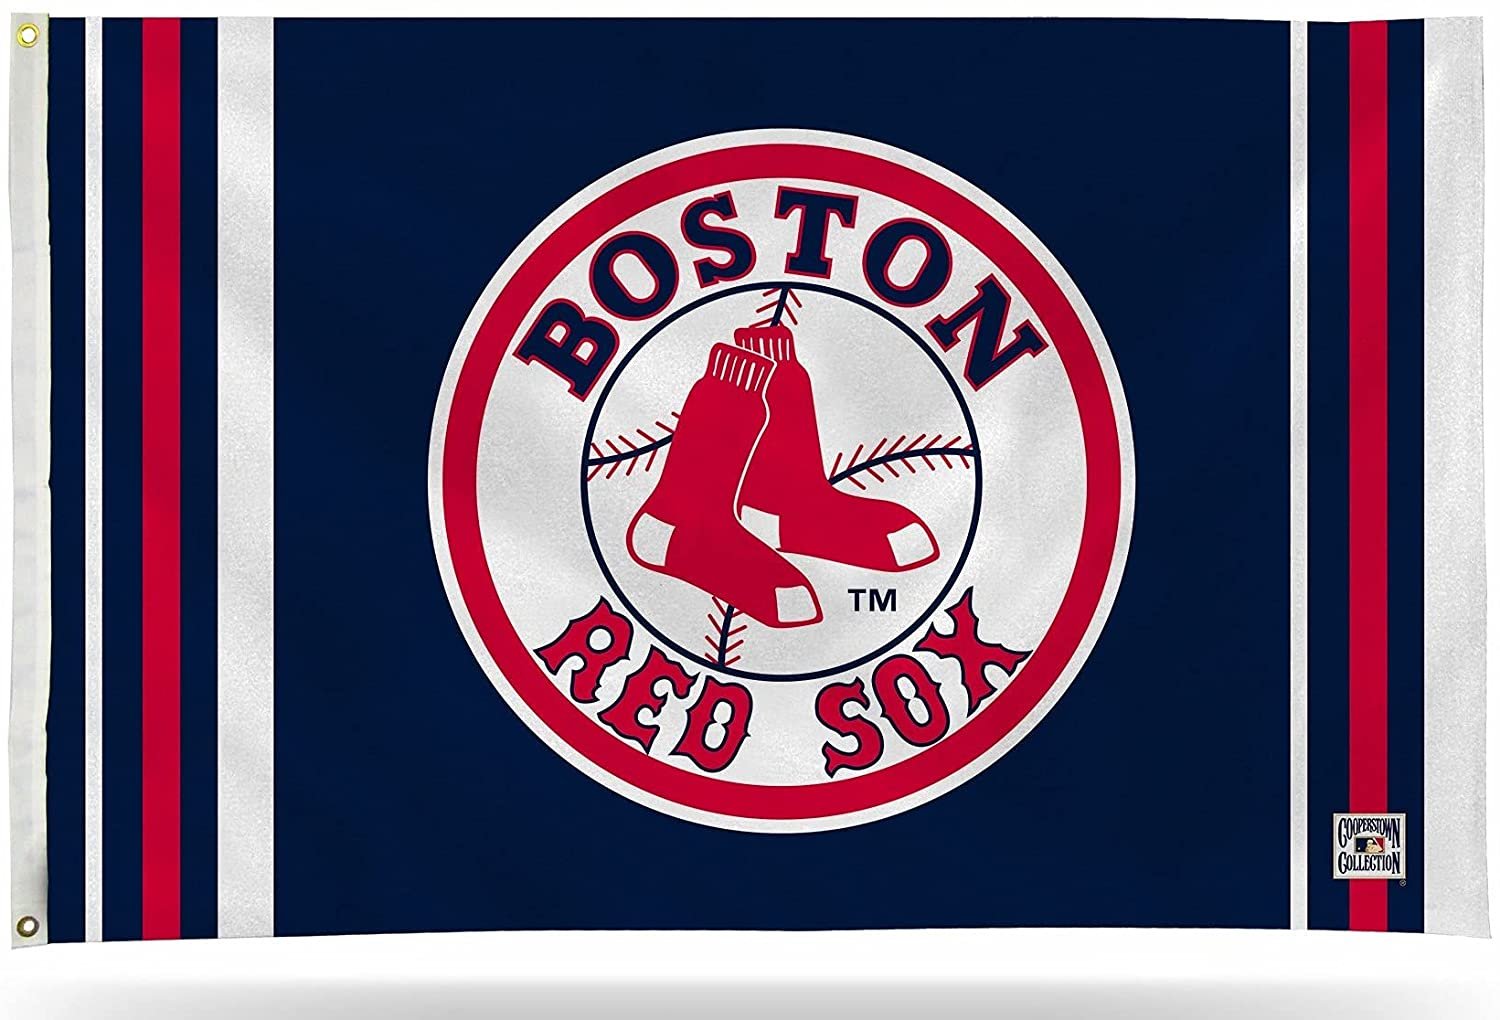 Boston Red Sox Flag Banner Retro Round Logo Design 3x5 Premium with Metal Grommets Outdoor House Baseball